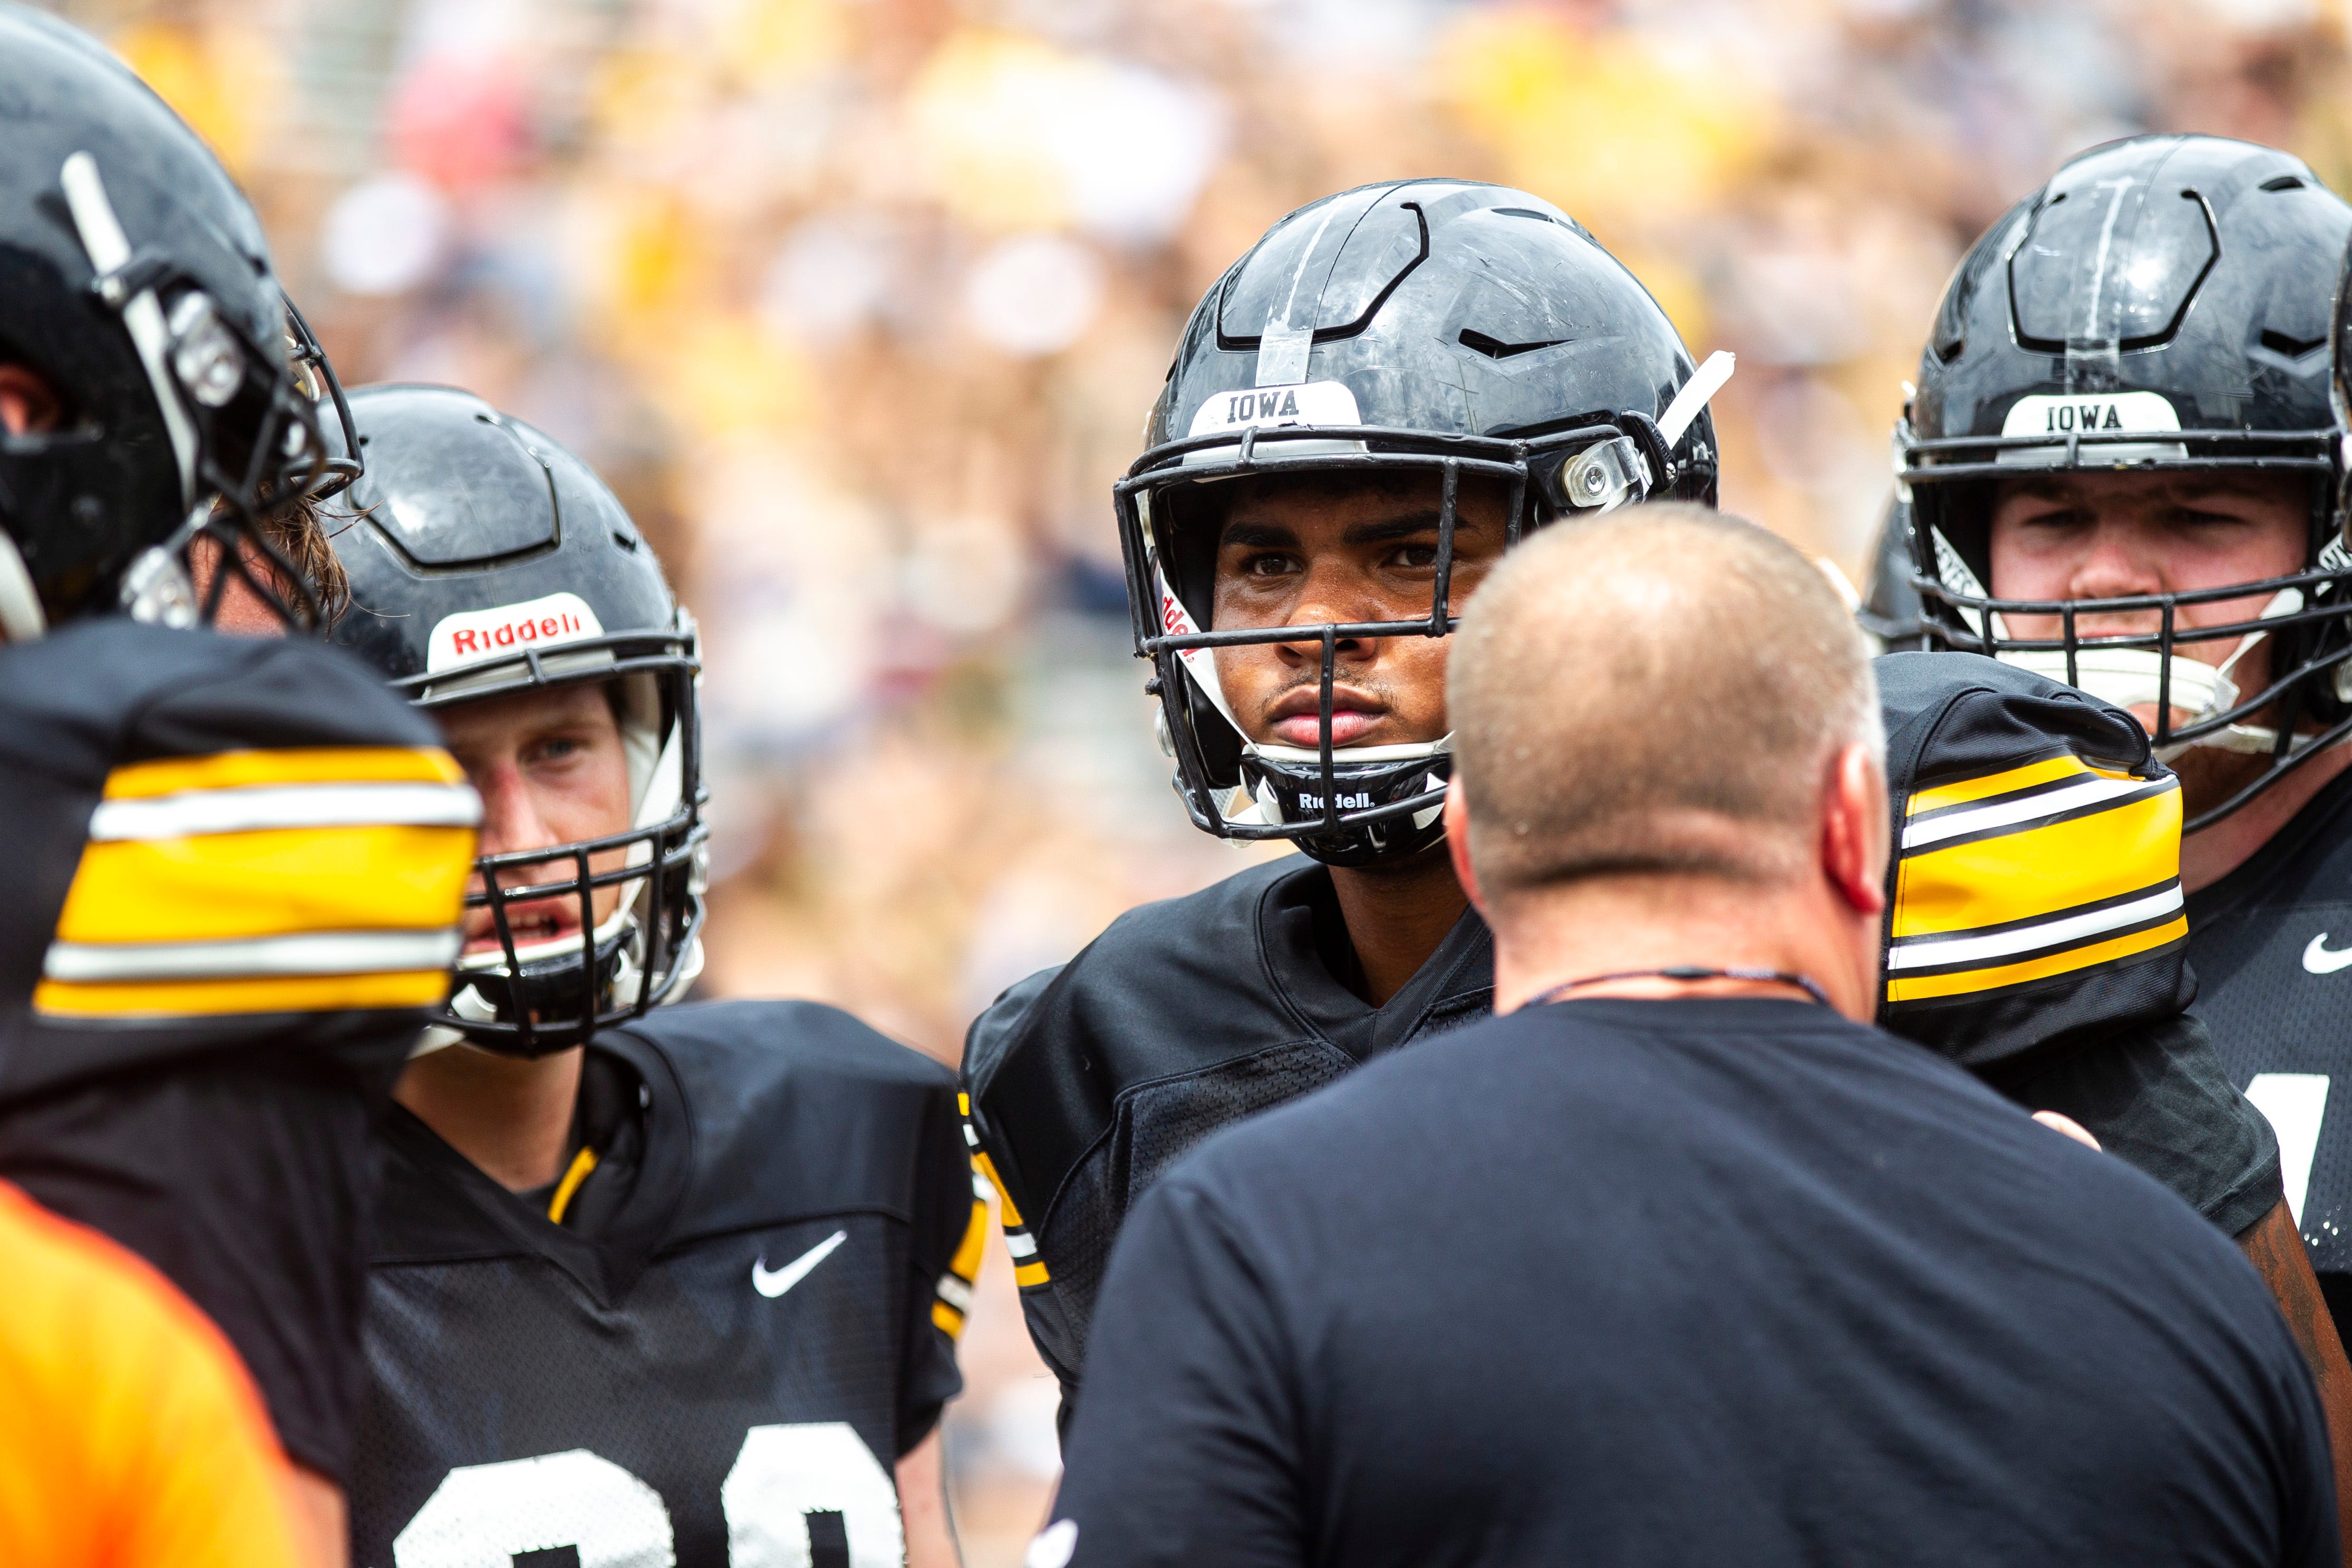 Iowa offensive linemen, including Tristan Wirfs, second from right, listen to coach Tim Polasek during a Hawkeyes football Kids Day scrimmage, Saturday, Aug. 10, 2019, at Kinnick Stadium in Iowa City, Iowa.